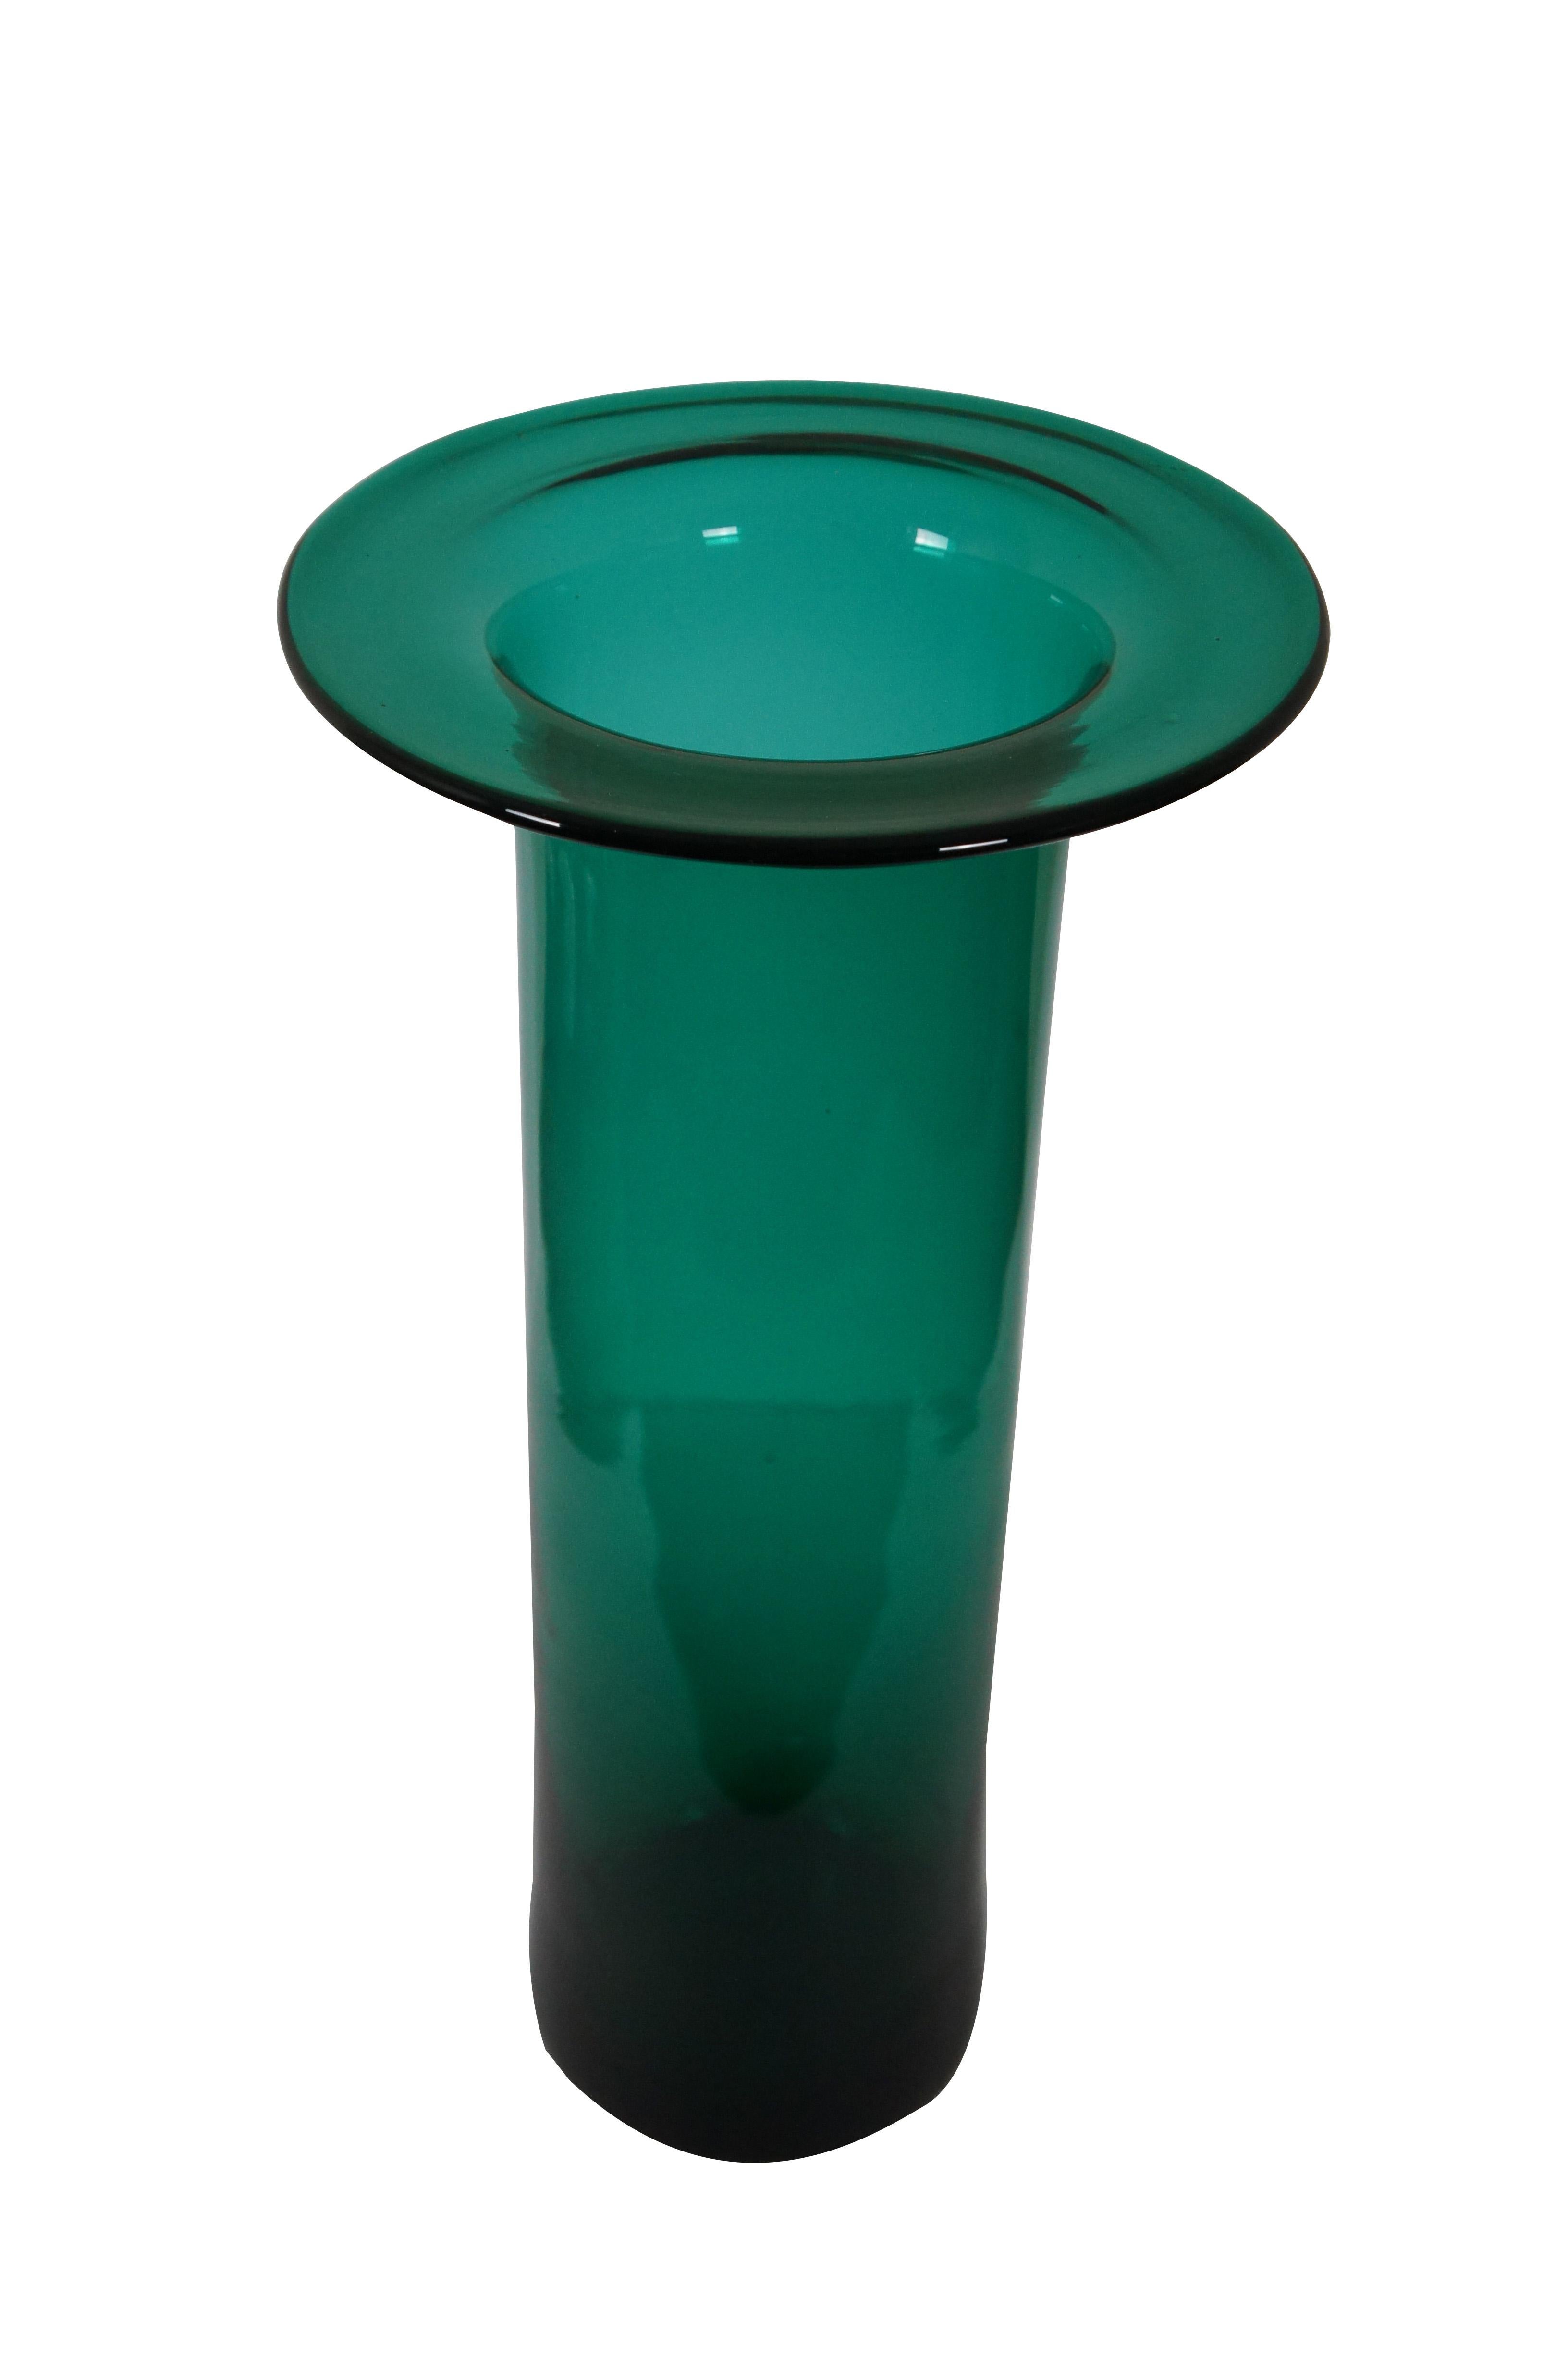 Mid century modern (1960s) large Blenko hand blown emerald green / teal glass vase featuring a tall cylindrical form with smoked base and a flat disc shaped rim.

Dimensions:
10” x 19.75” (Diameter x Height)